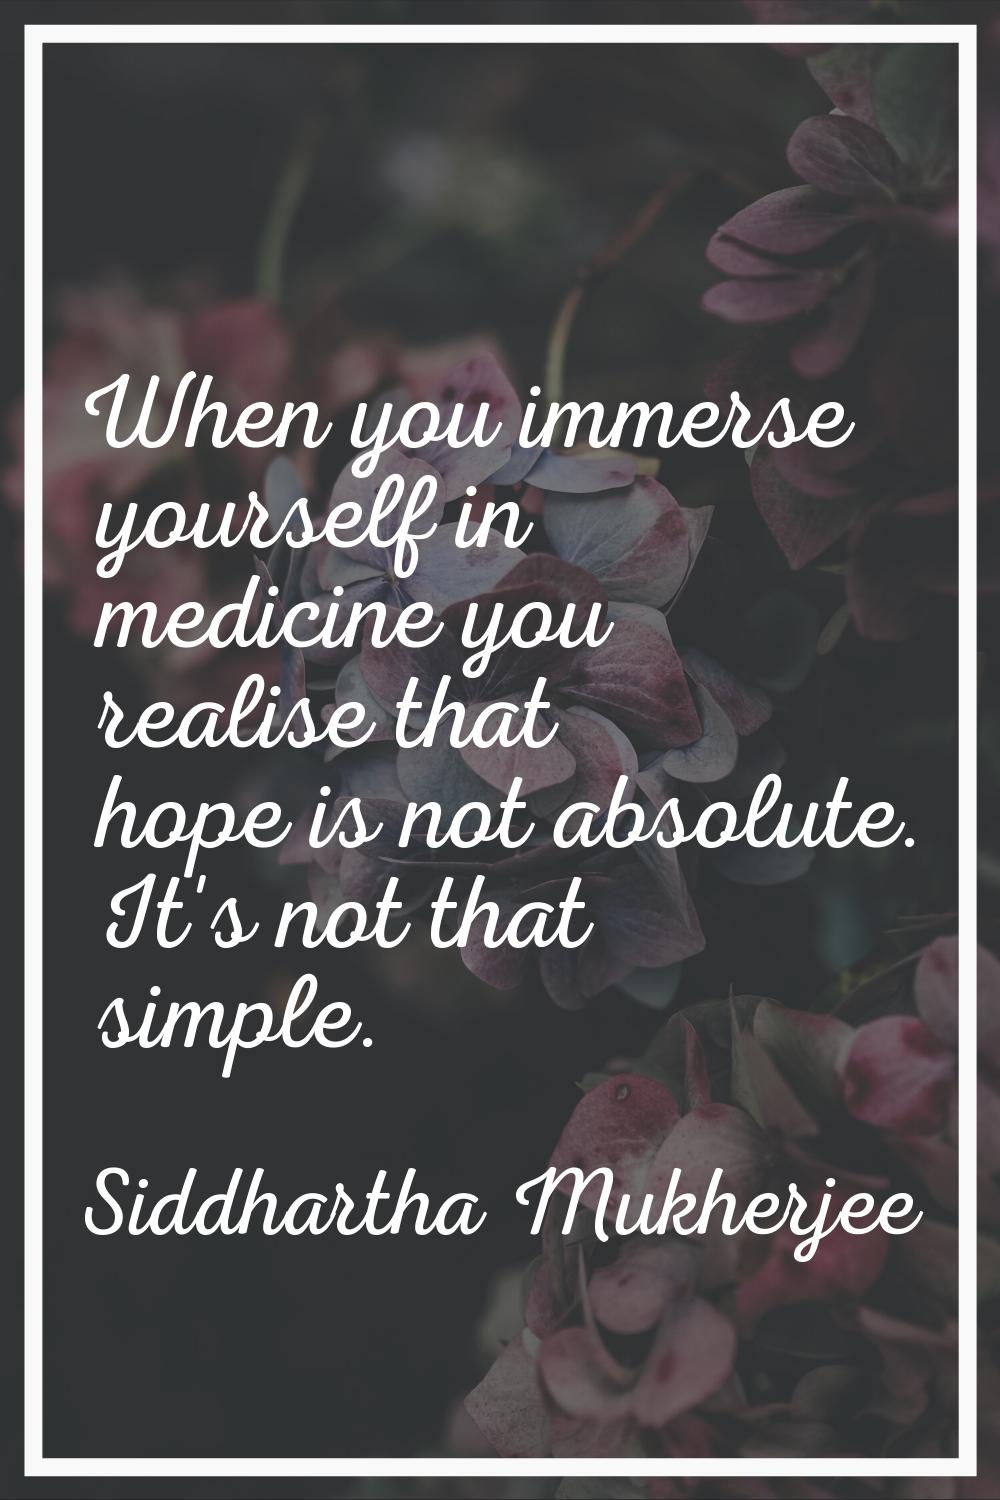 When you immerse yourself in medicine you realise that hope is not absolute. It's not that simple.